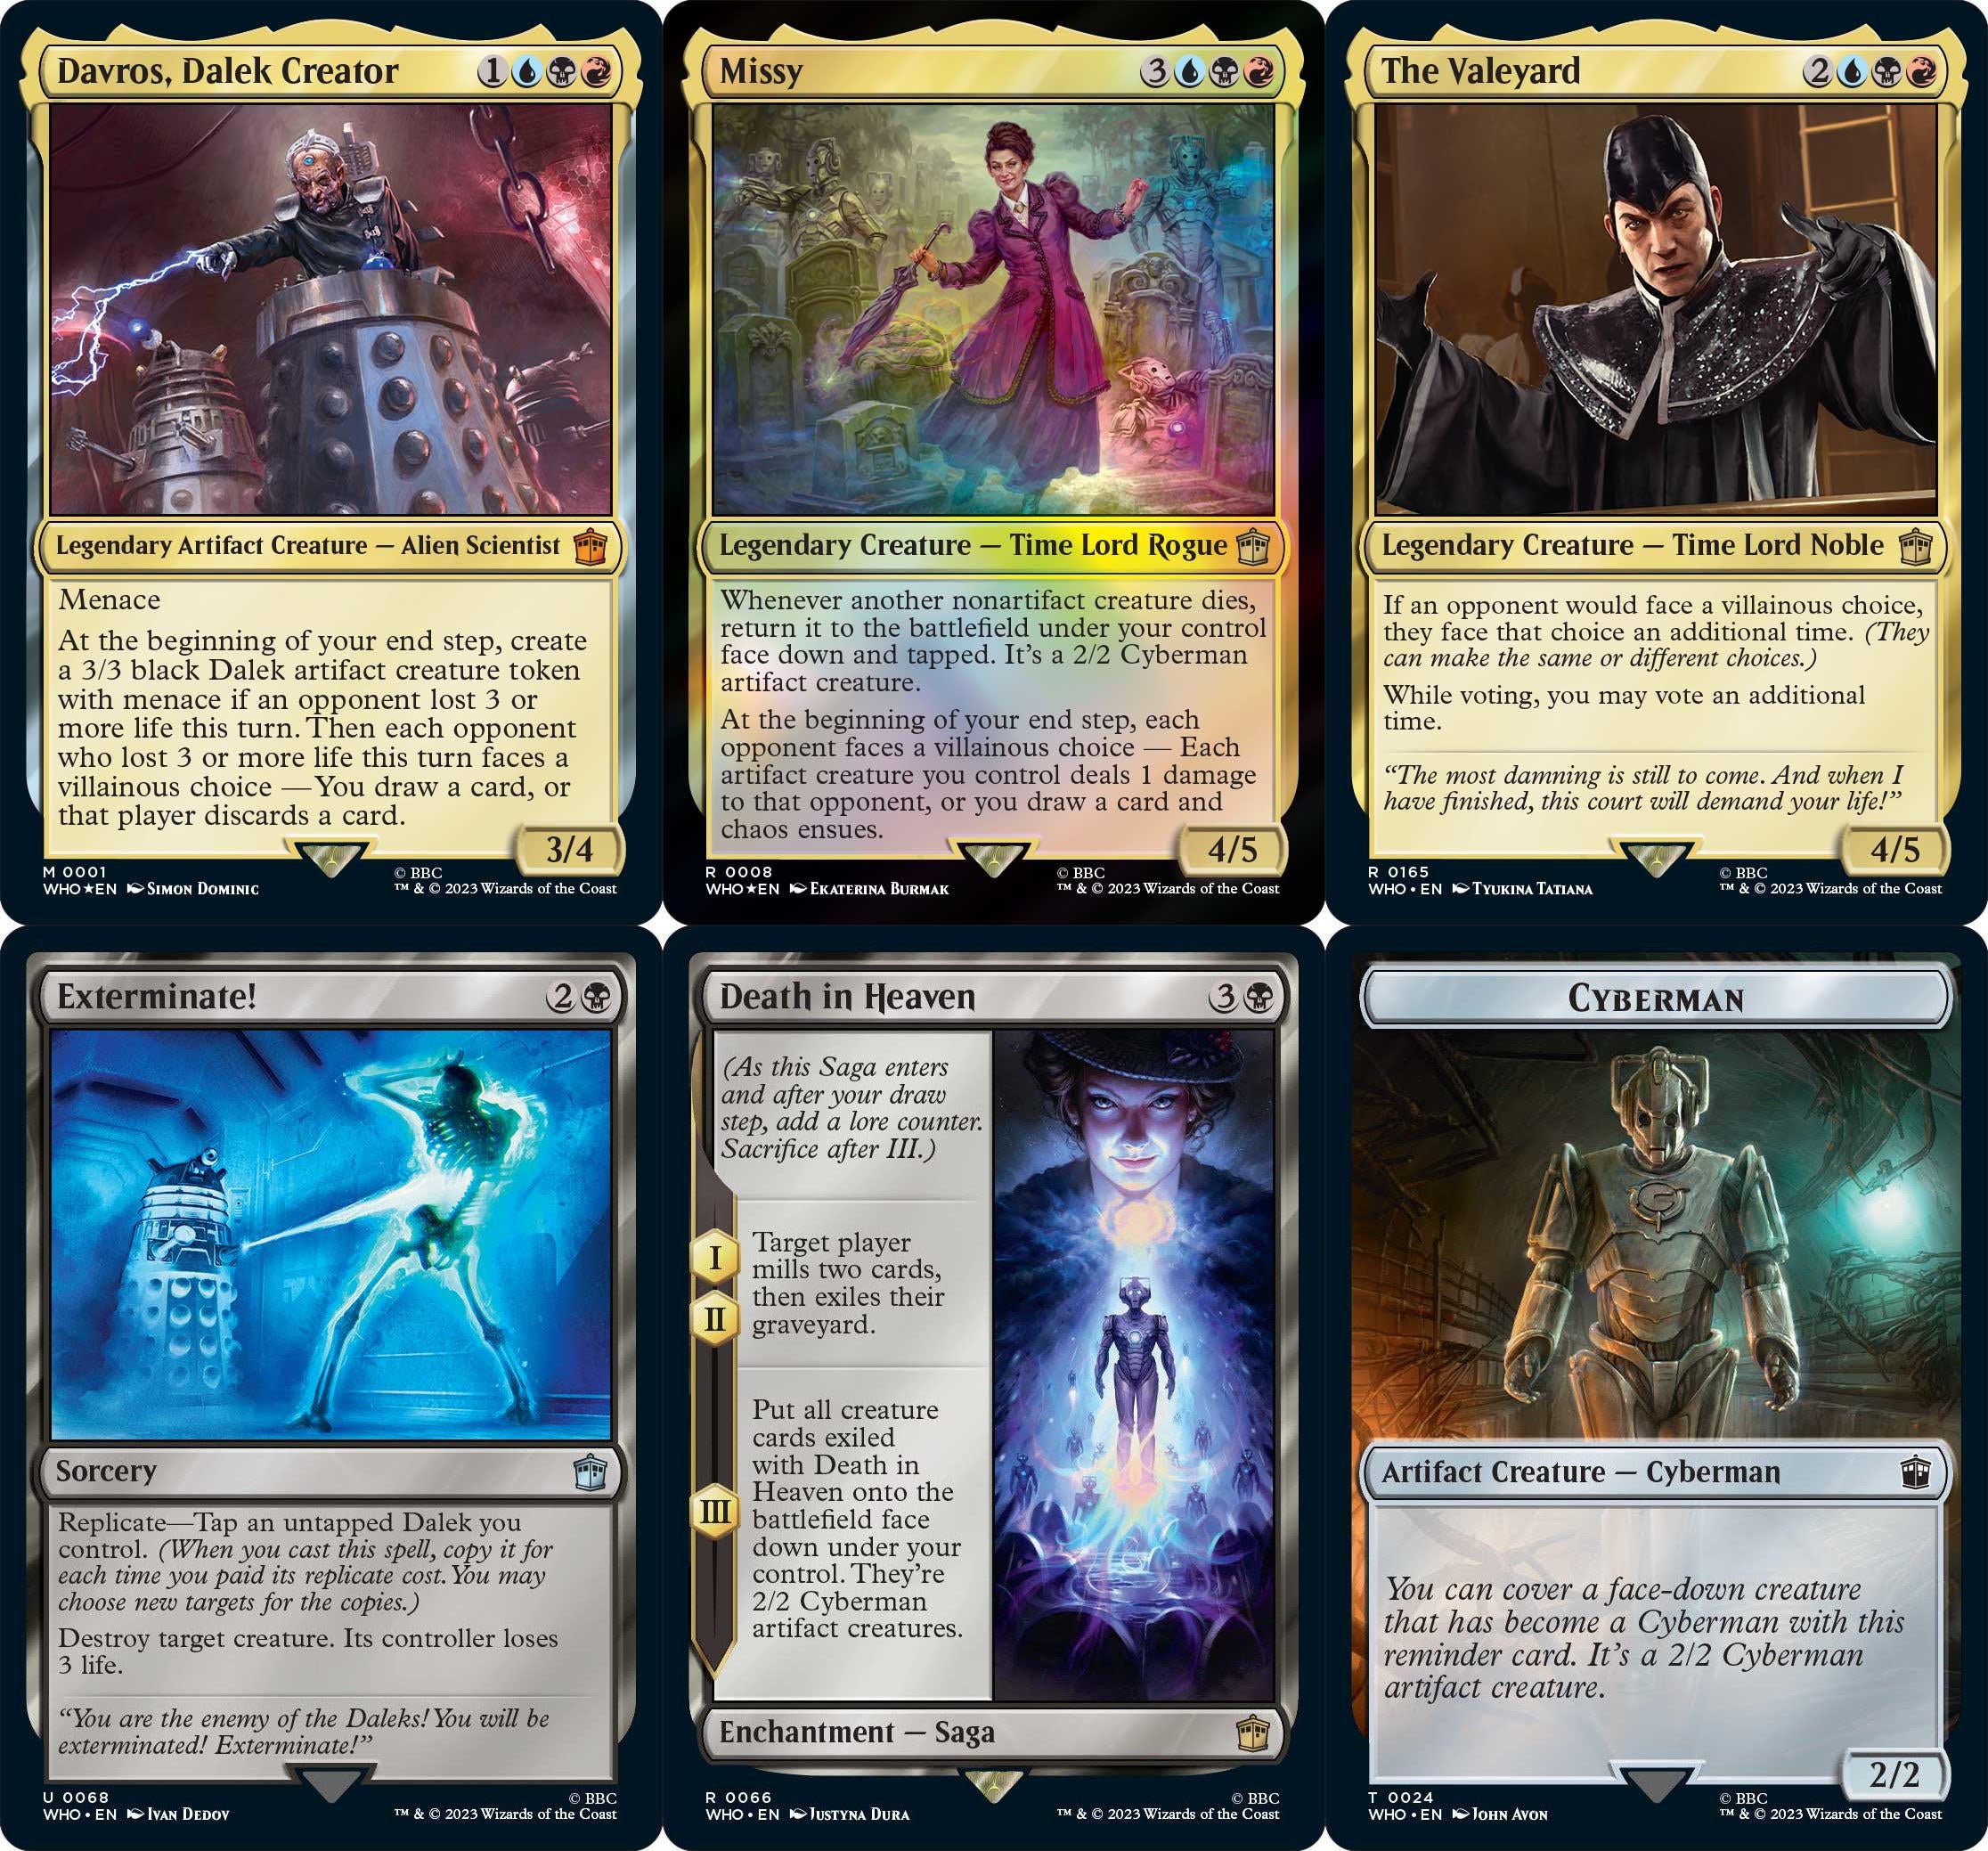 Magic The Gathering Reveals New Look at Doctor Who Set